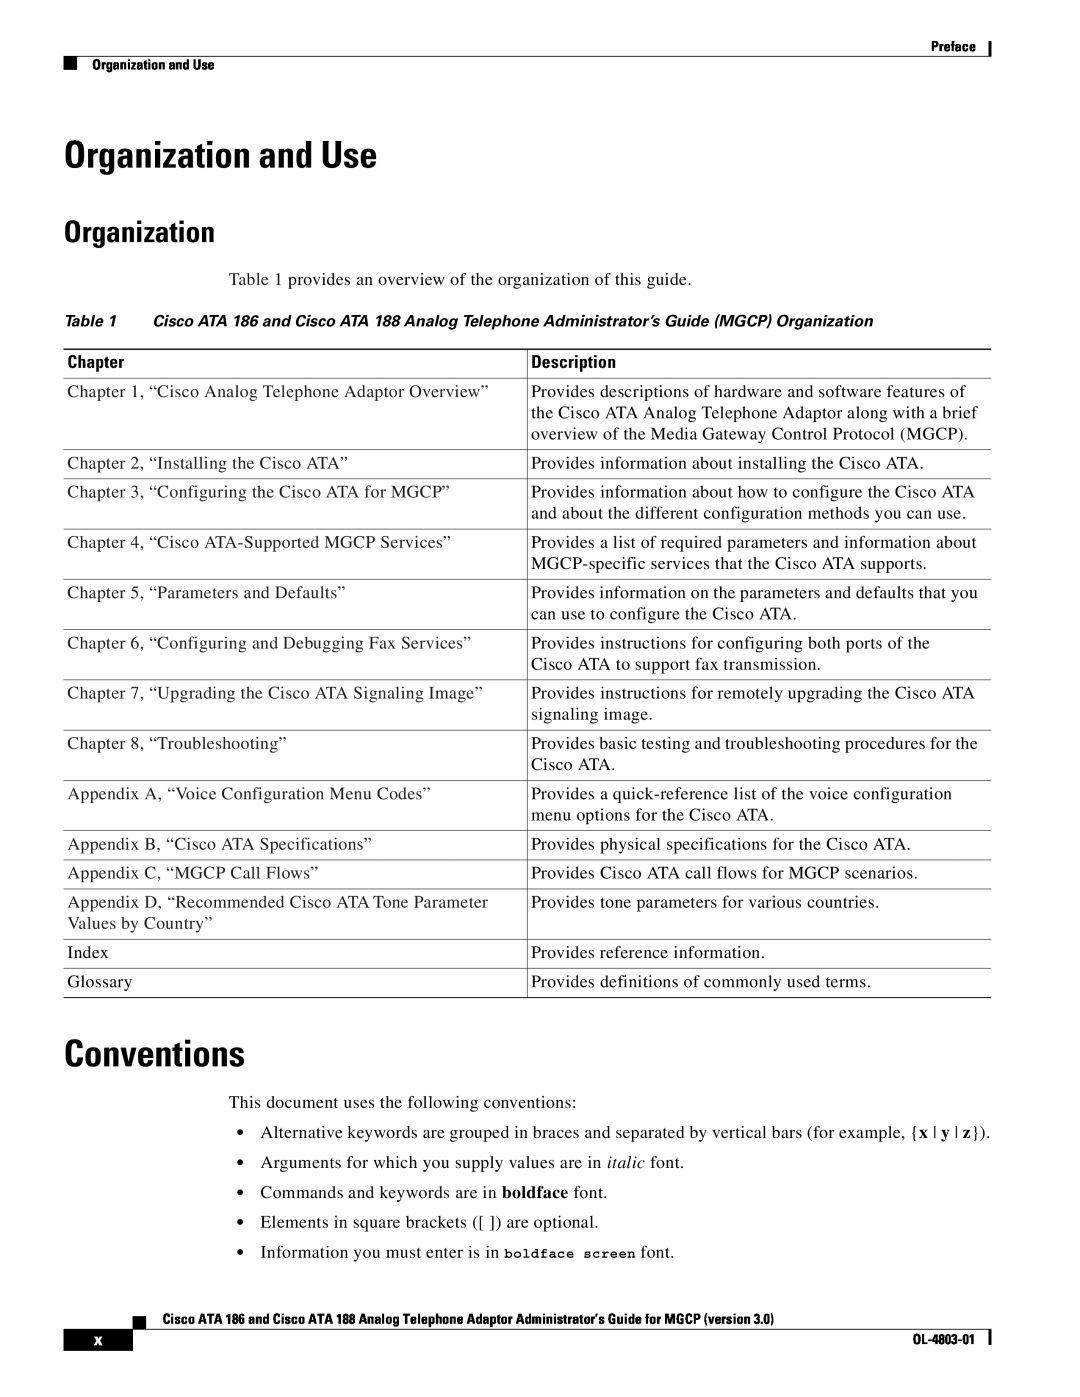 Cisco Systems ATA 186 Organization and Use, Conventions, Chapter, Description, “Cisco Analog Telephone Adaptor Overview” 